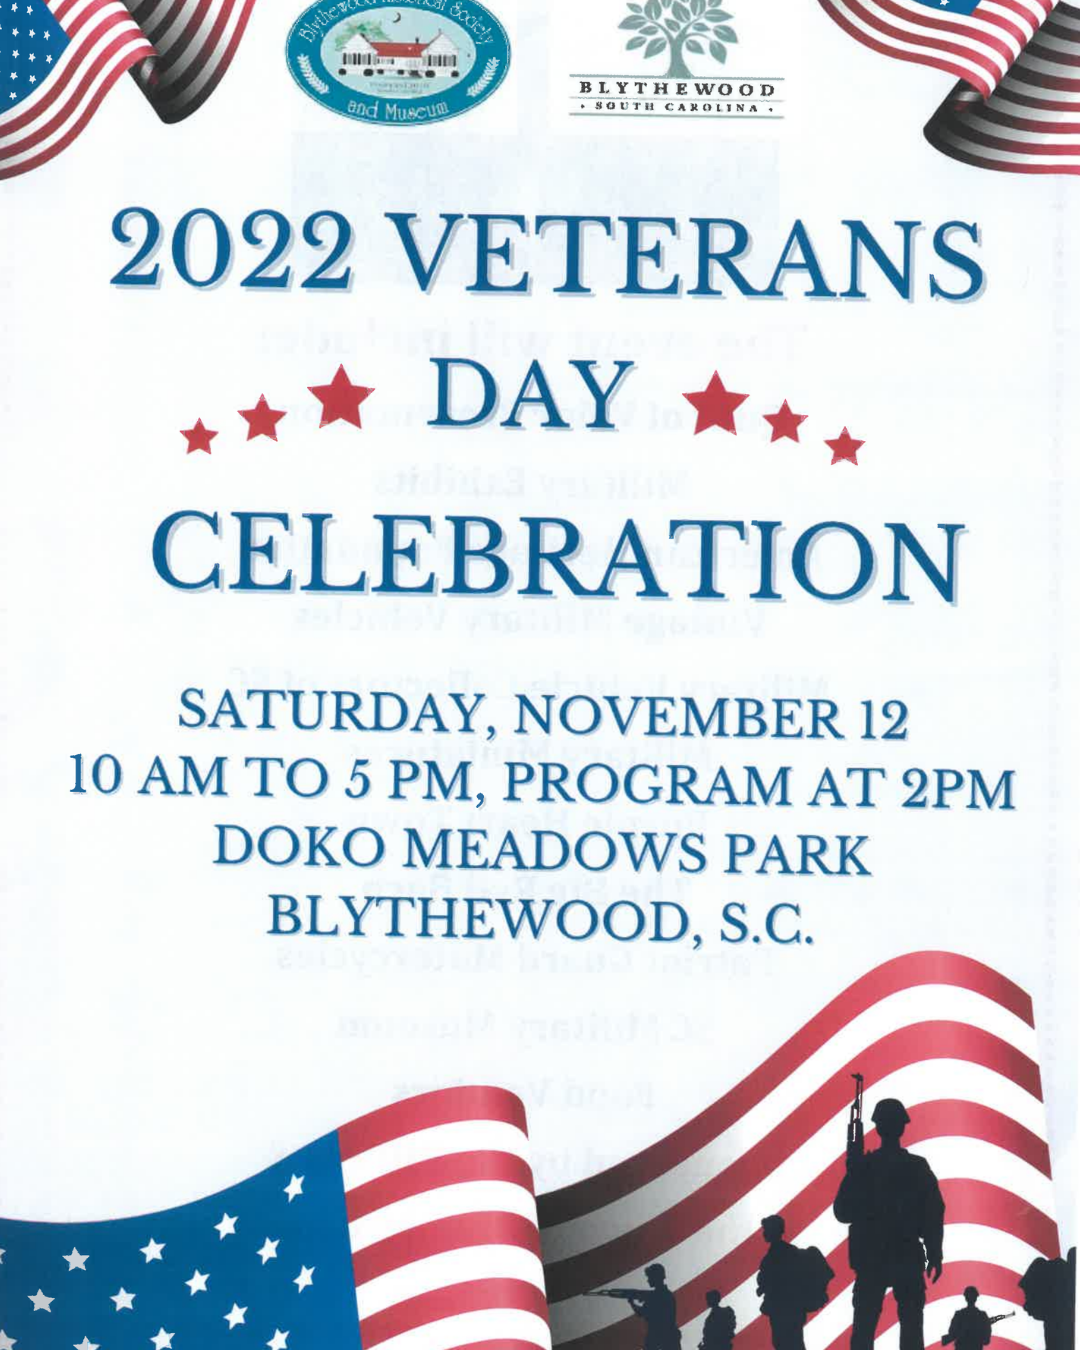 Veterans Day 2022: Events, What's Open, Closed Around Mount Vernon